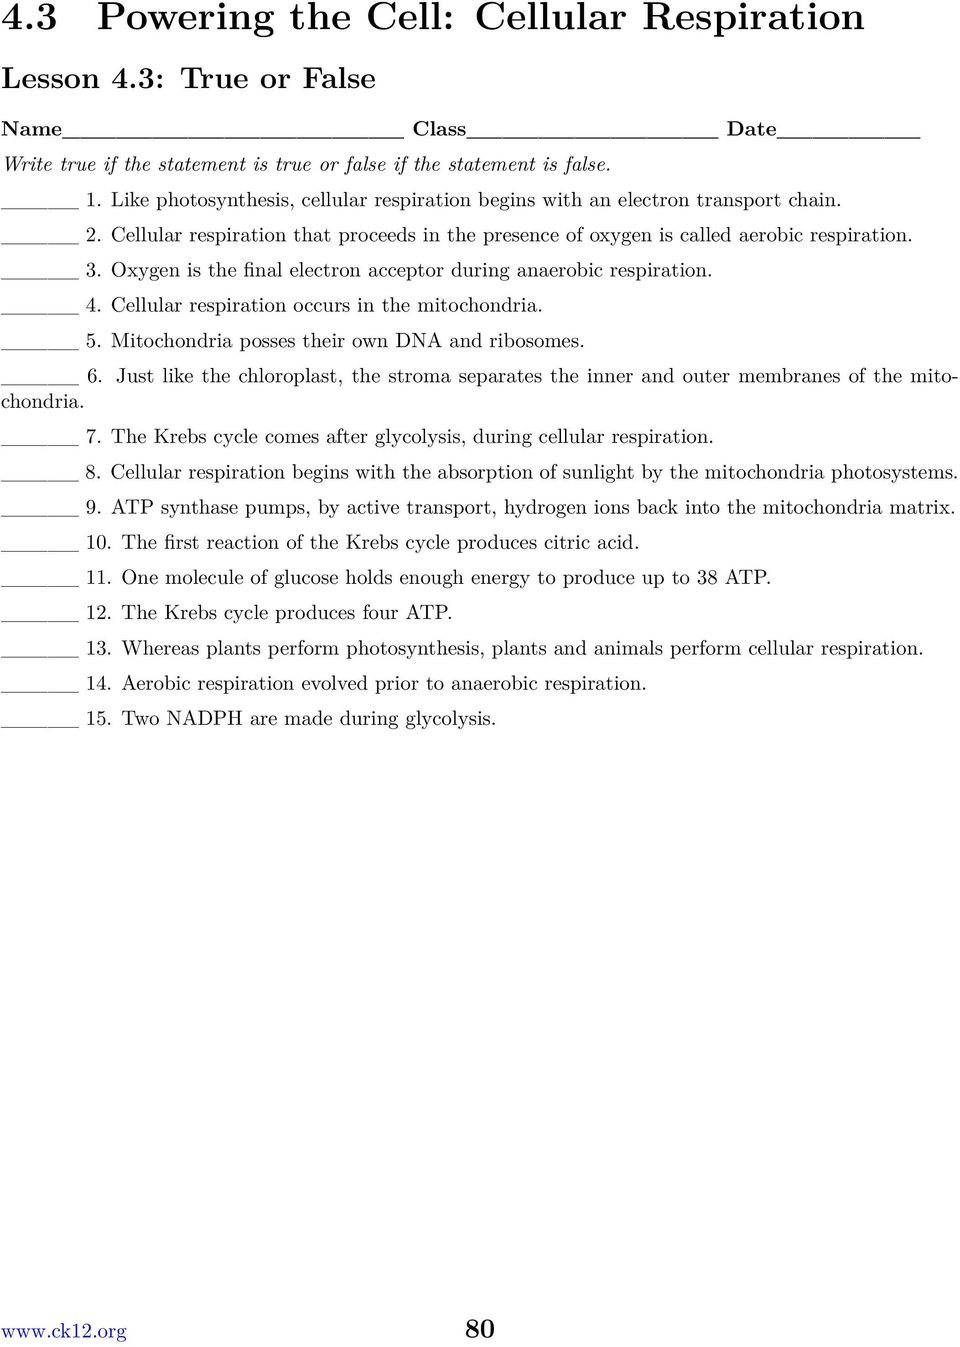 Chapter 4 Photosynthesis And Cellular Respiration Worksheets Pdf For Cellular Respiration Worksheet Pdf